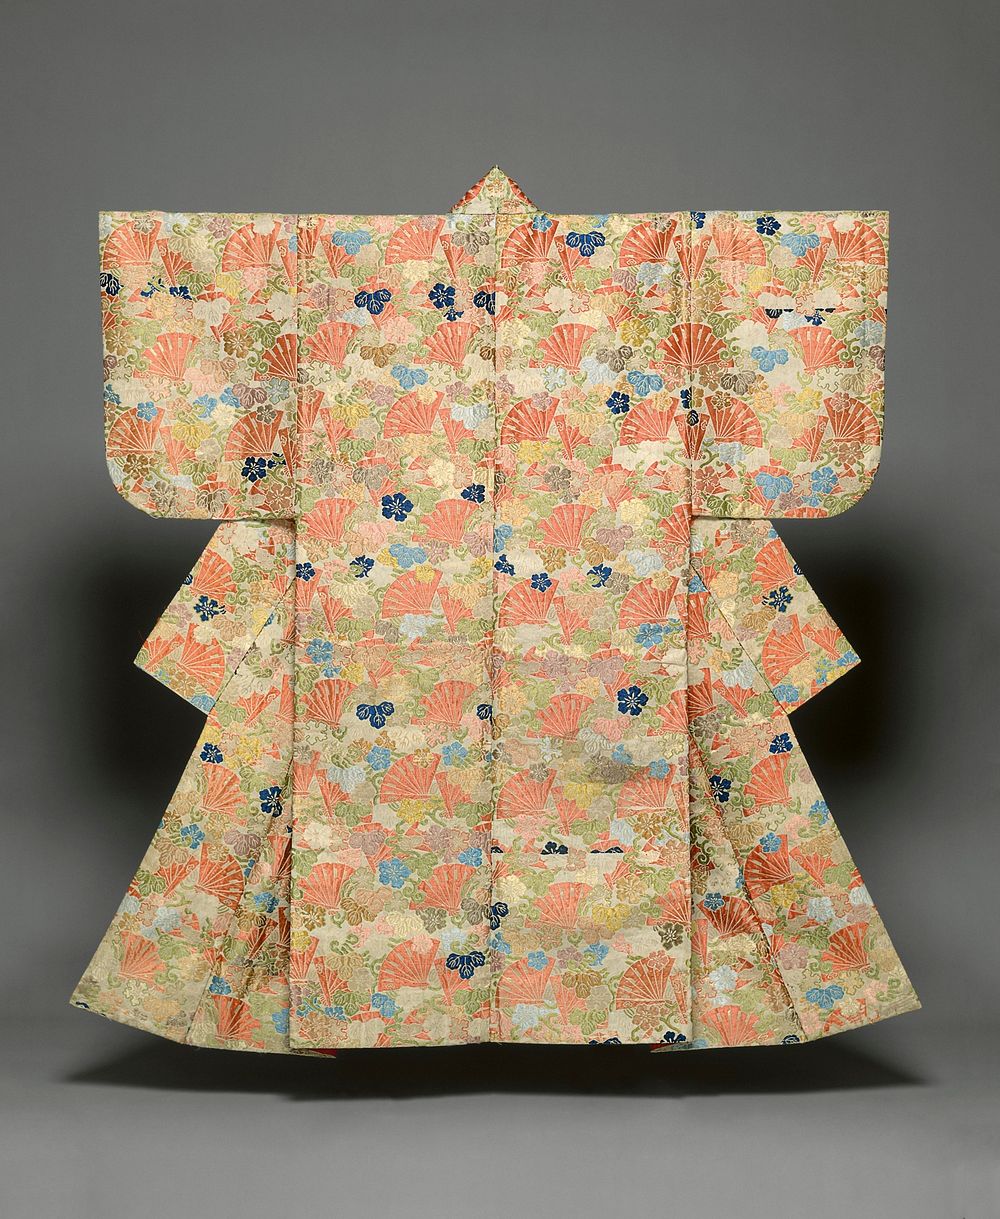 Noh Costume (Karaori) with Cypress Fans and Moonflower (Yūgao) Blossoms